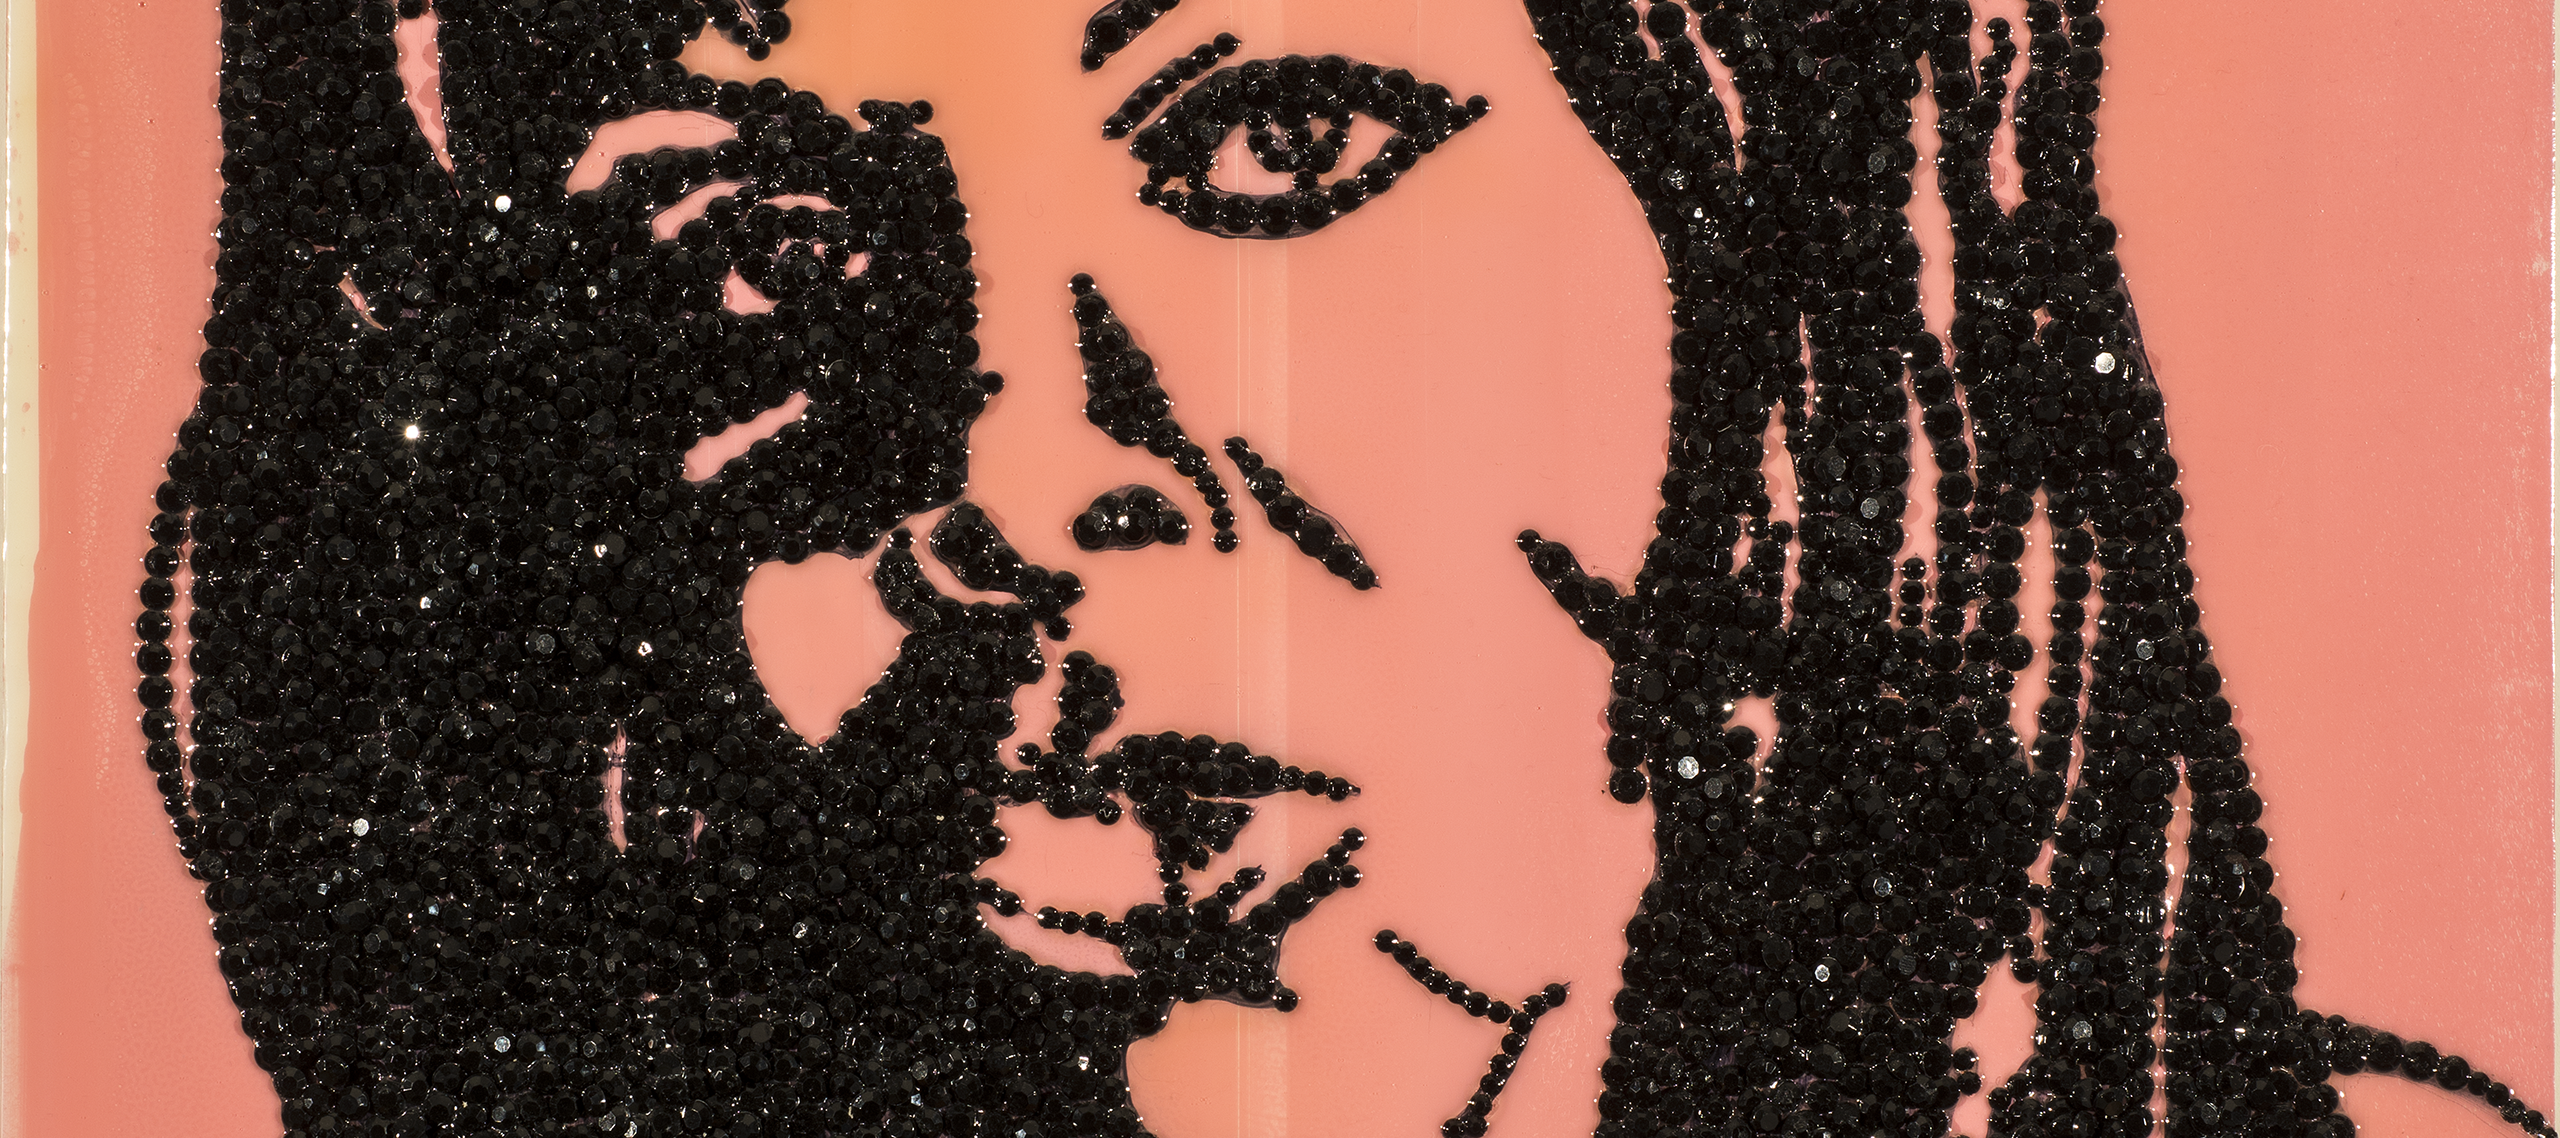 An enamel portrait painting of a woman made with encrusted black rhinestones glued to shiny pink acrylic background.